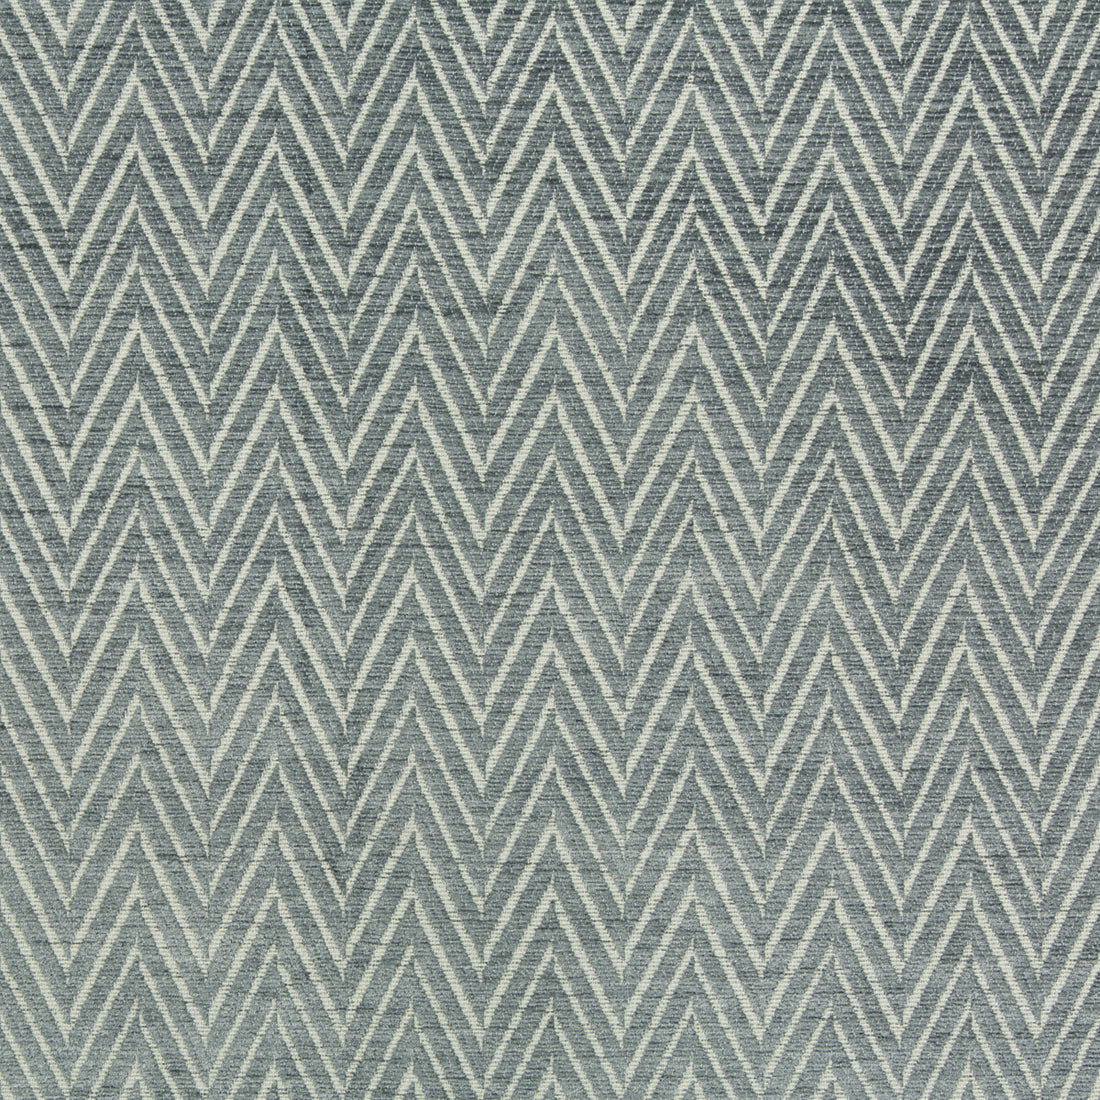 Kravet Contract fabric in 34743-11 color - pattern 34743.11.0 - by Kravet Contract in the Incase Crypton Gis collection